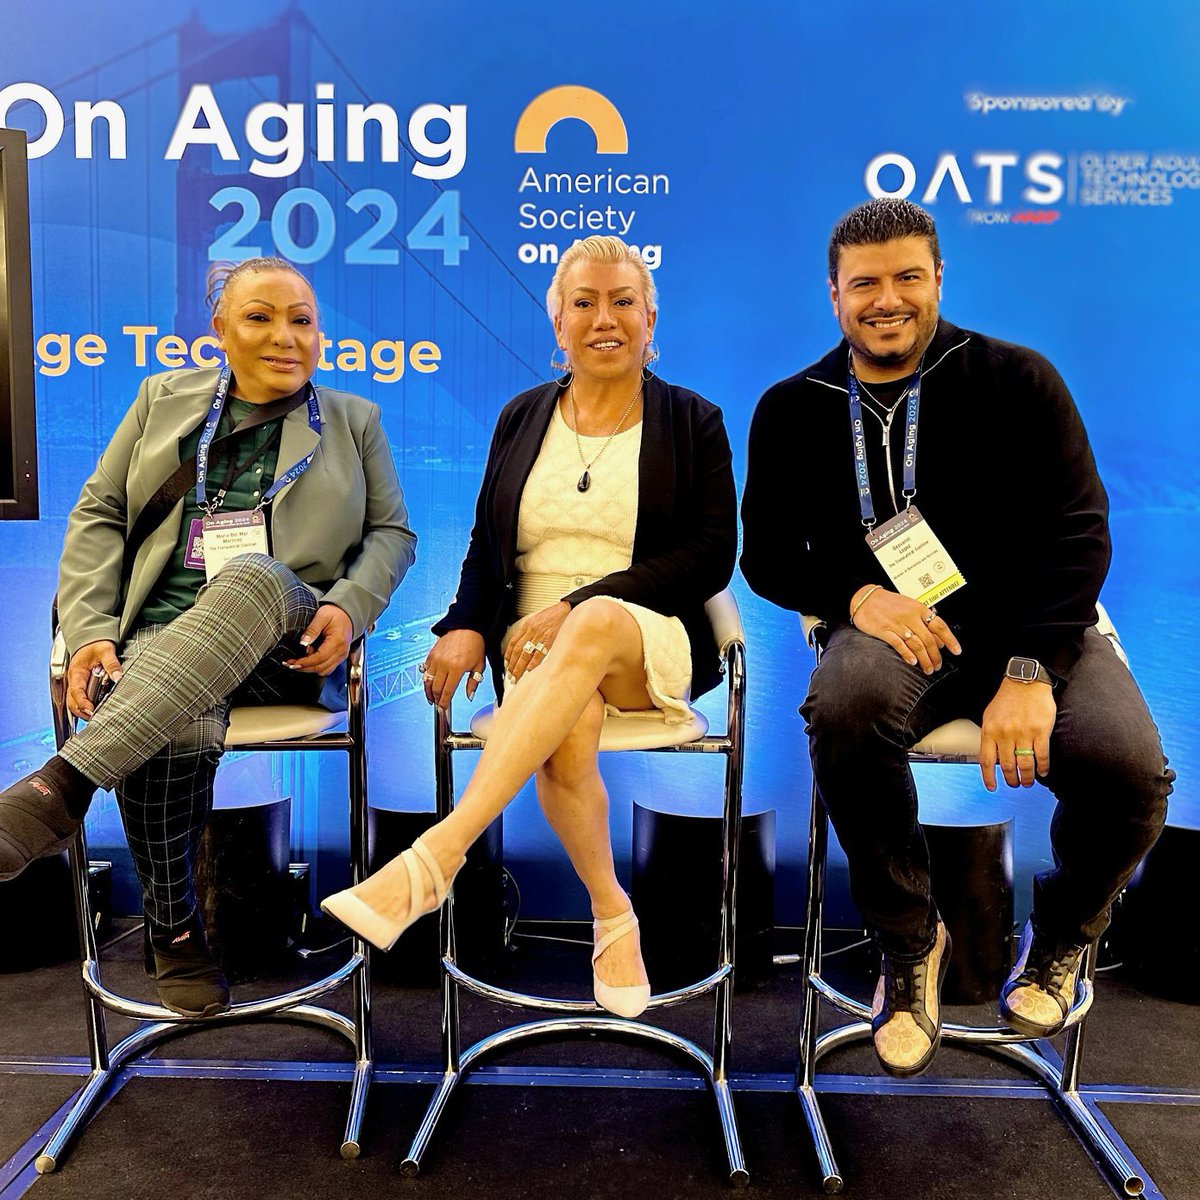 Our team is participating in the American Aging Society Conference thanks to the generosity of @gileadsciences bringing the topic of aging trans people and the impact of HIV. #DiamondsReport #livingwithdignity #policyreport #transisbeautiful #transpower